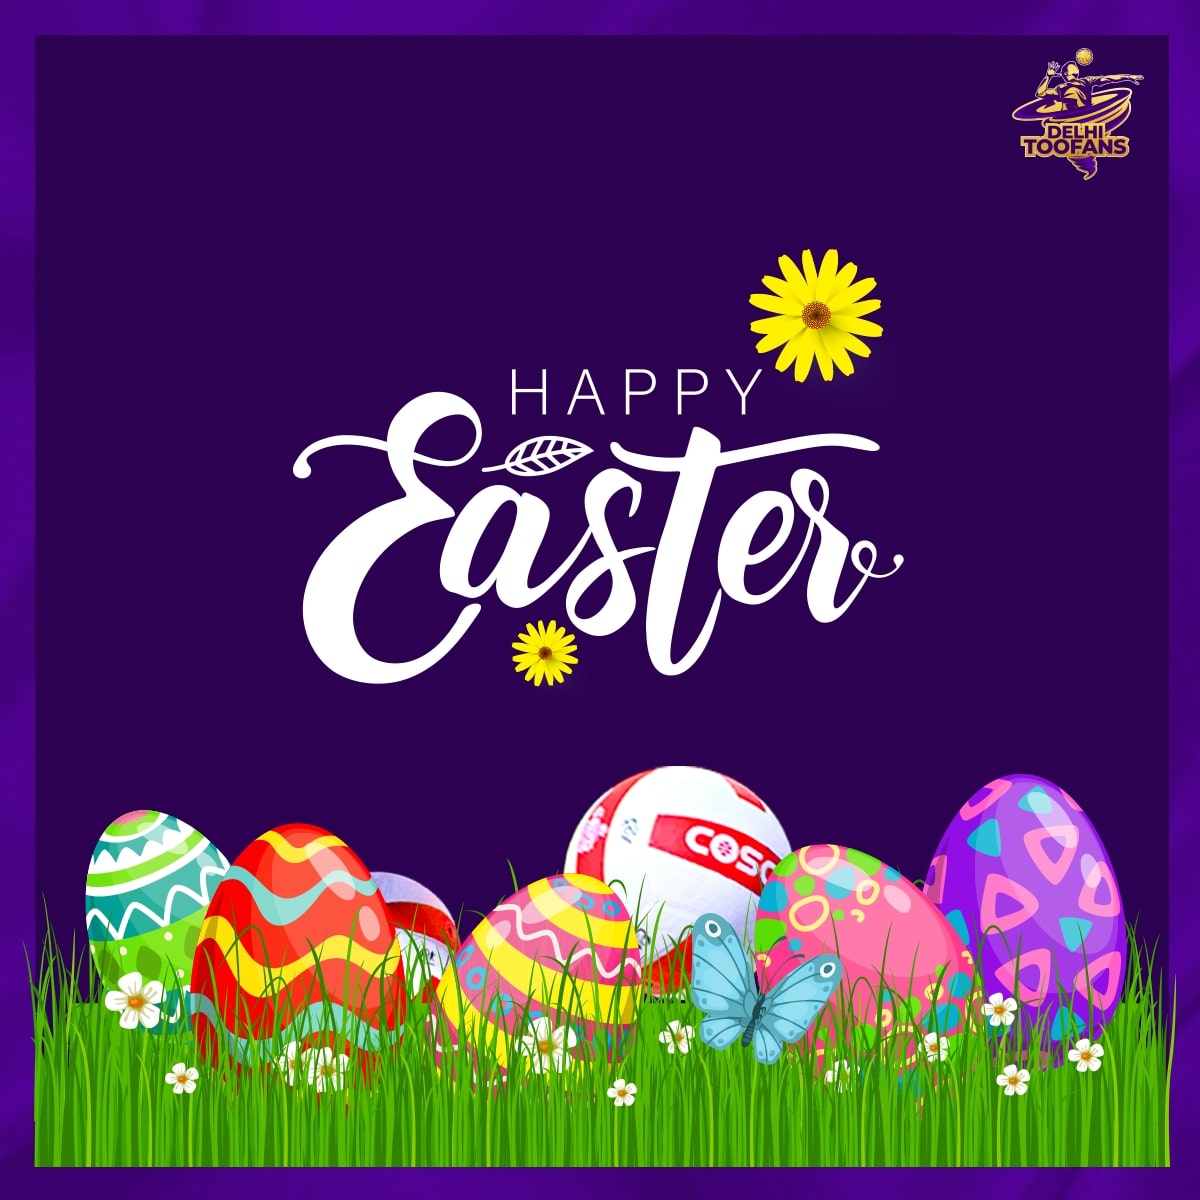 Wishing everyone a very Happy and Relaxed #Easter Sunday 💜🥚

May God bless you with hope, happiness and good health 🤗

#DilSeToofan #DelhiToofans #RuPayPrimeVolley #PVL #HappyEaster